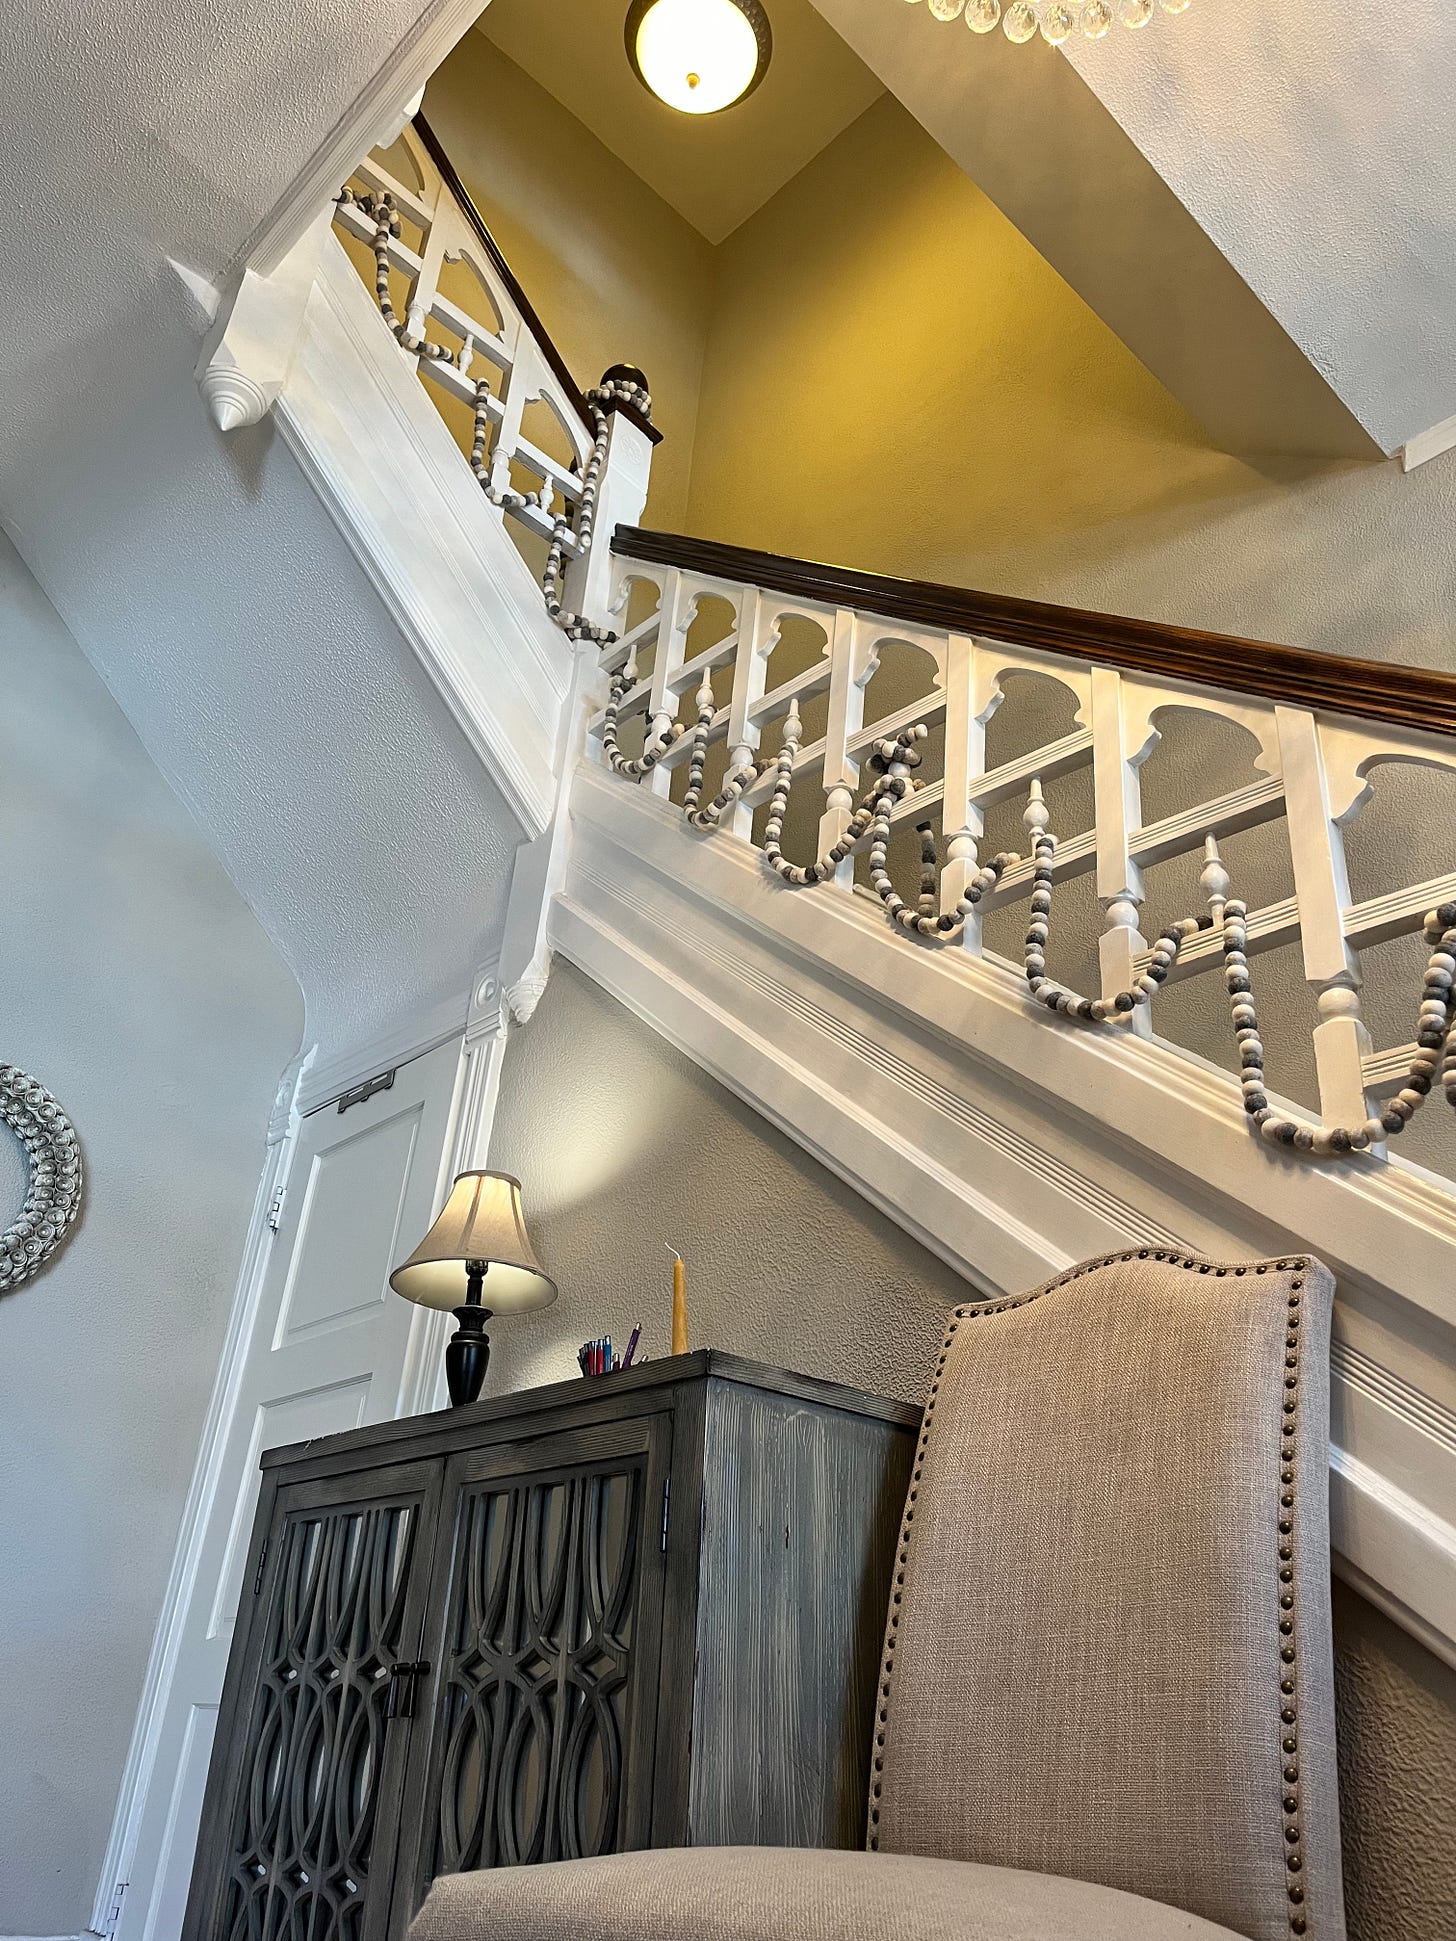 Looking up at a two-story white staircase with brown wood railings and white spindles draped with gray felted wool garland.